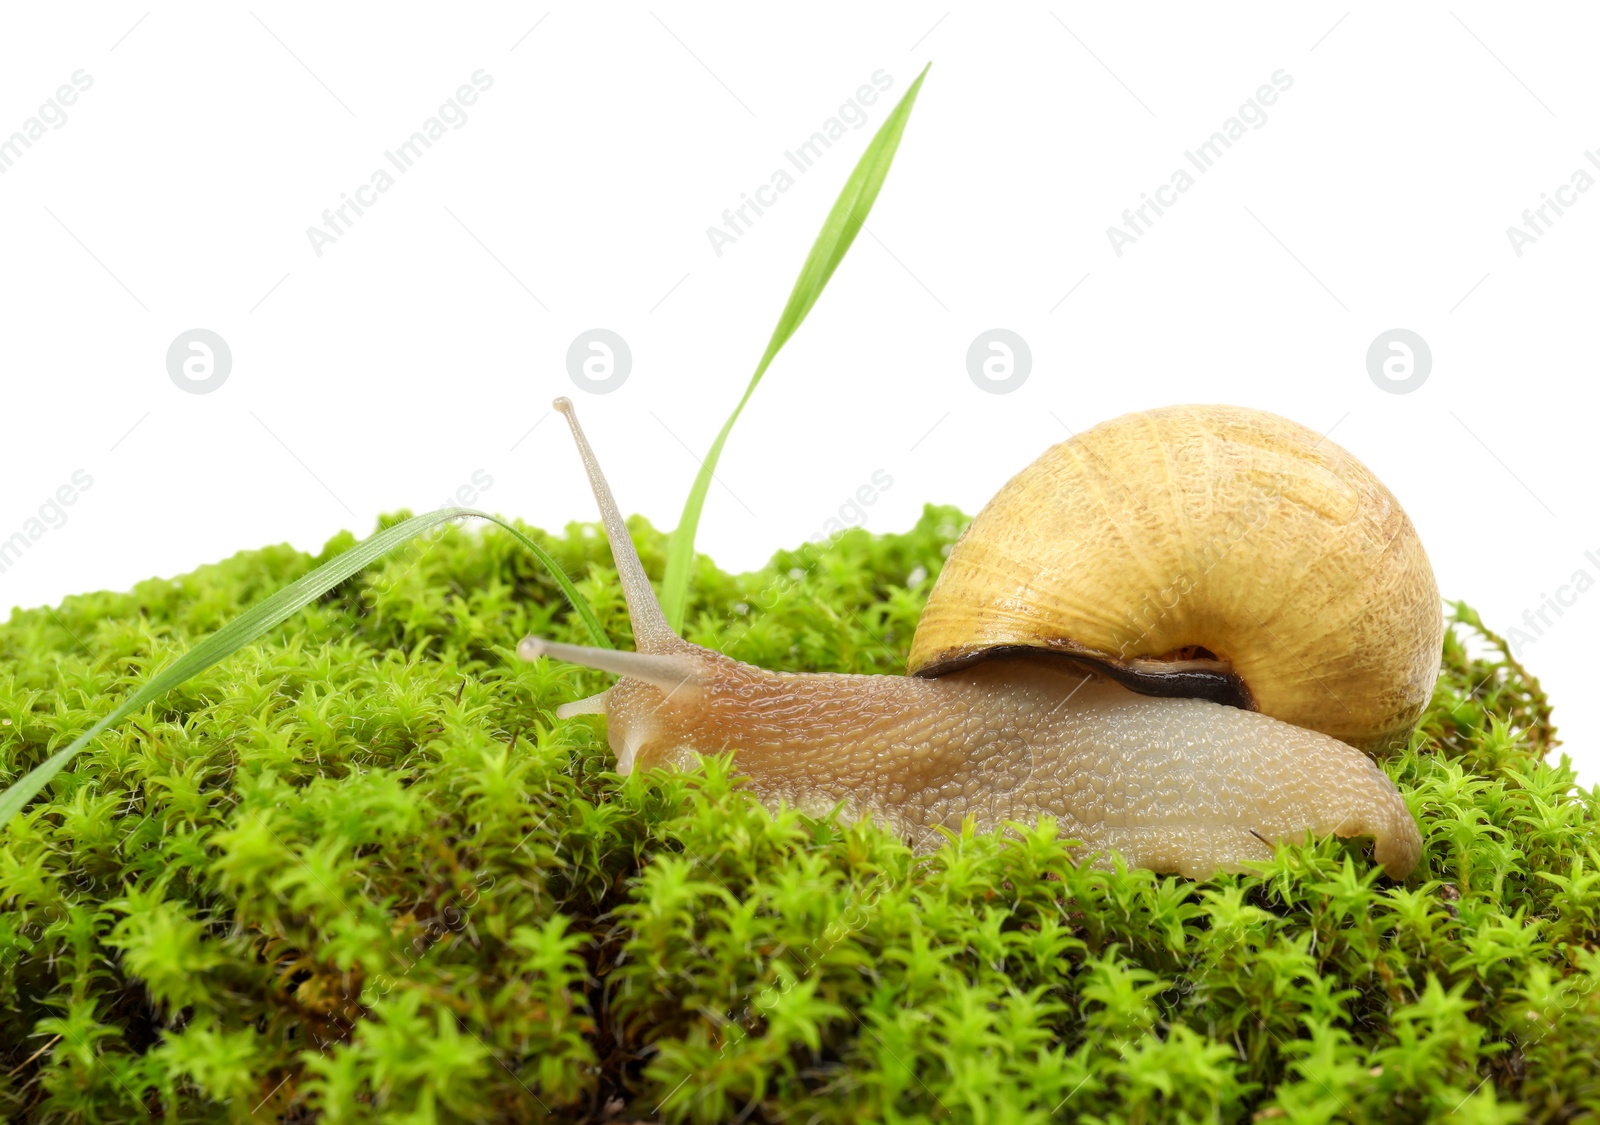 Photo of Common garden snail on green moss against white background, closeup